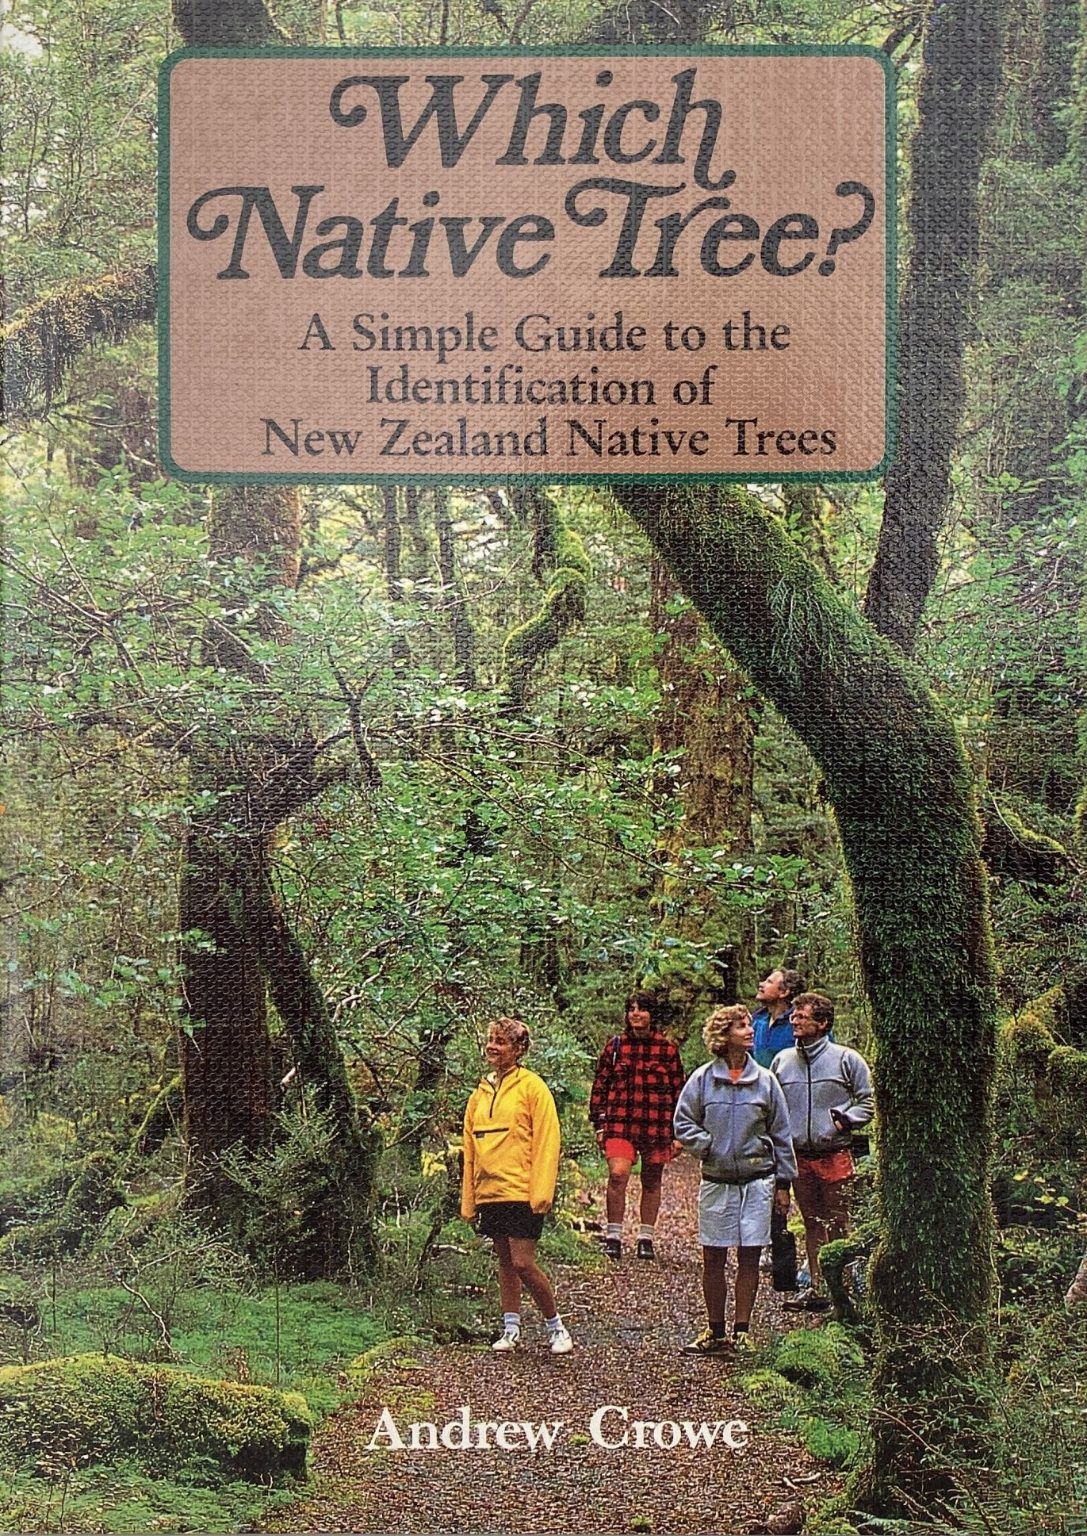 WHICH NATIVE TREE? A Guide to the Identification of New Zealand Native Trees